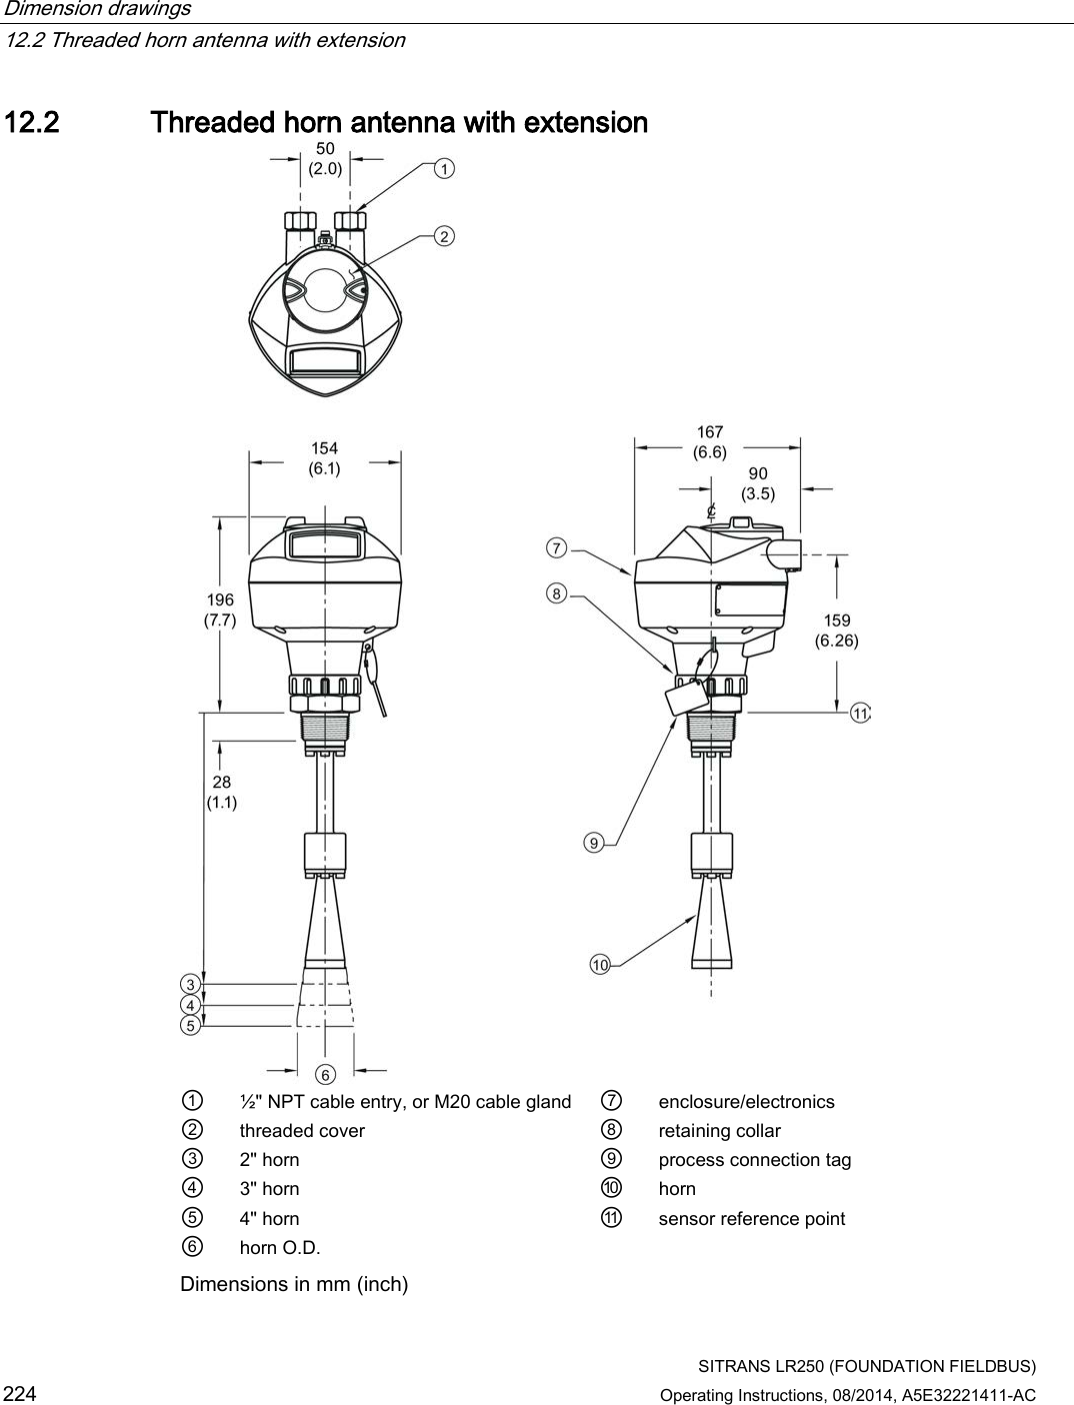 Dimension drawings   12.2 Threaded horn antenna with extension  SITRANS LR250 (FOUNDATION FIELDBUS) 224 Operating Instructions, 08/2014, A5E32221411-AC 12.2 Threaded horn antenna with extension  ① ½&quot; NPT cable entry, or M20 cable gland ⑦ enclosure/electronics ② threaded cover ⑧ retaining collar ③ 2&quot; horn ⑨ process connection tag ④ 3&quot; horn ⑩ horn ⑤ 4&quot; horn ⑪ sensor reference point ⑥ horn O.D.   Dimensions in mm (inch) 